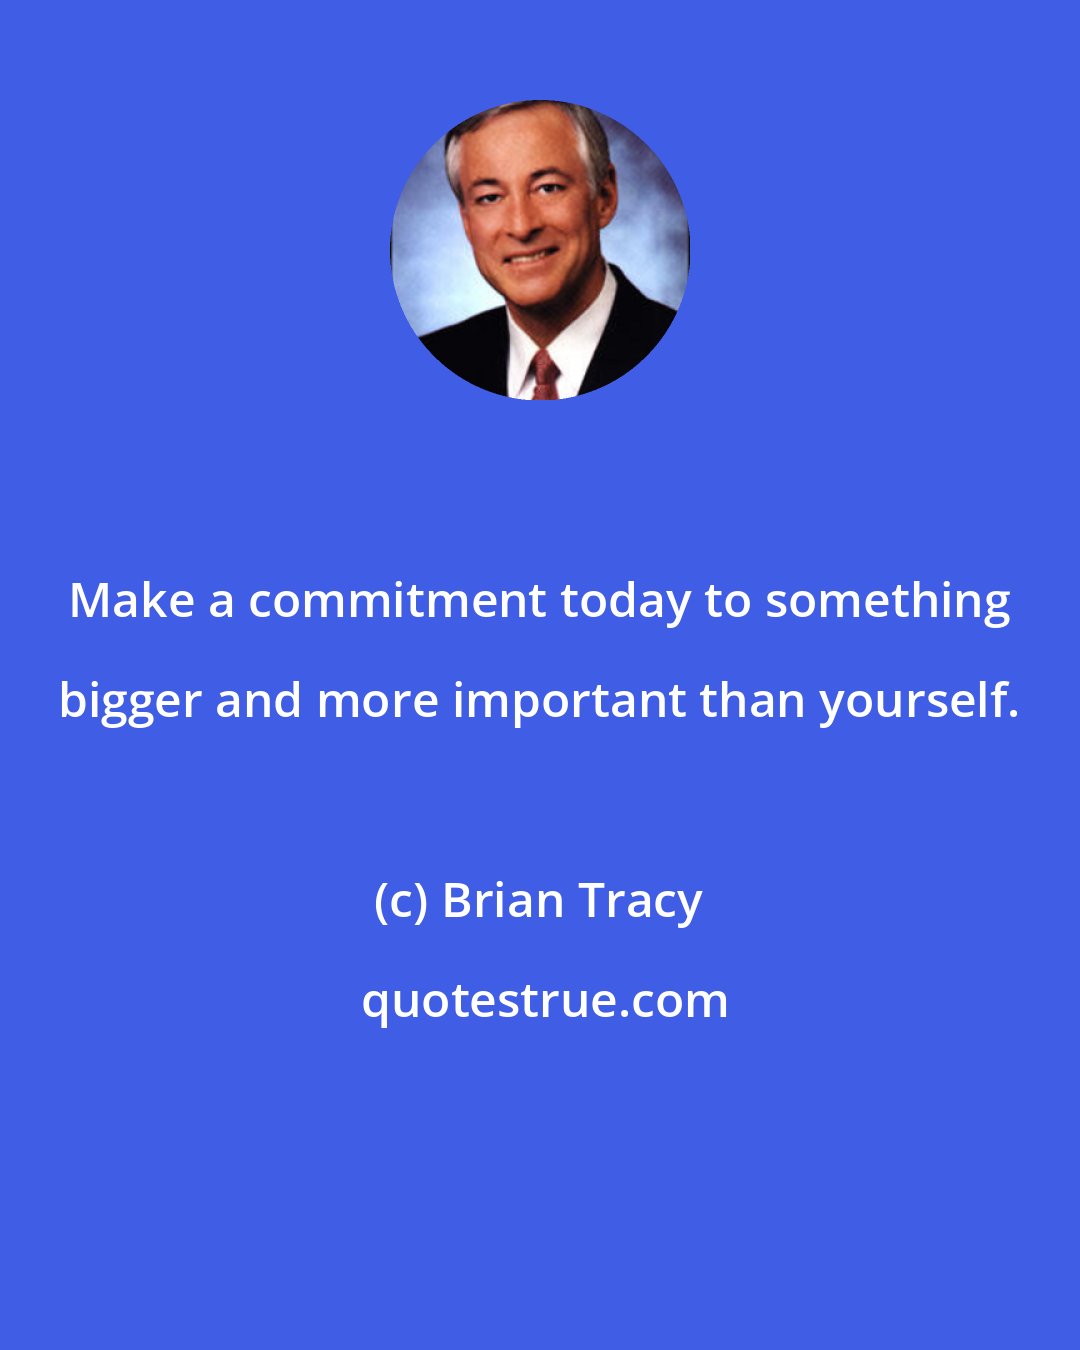 Brian Tracy: Make a commitment today to something bigger and more important than yourself.